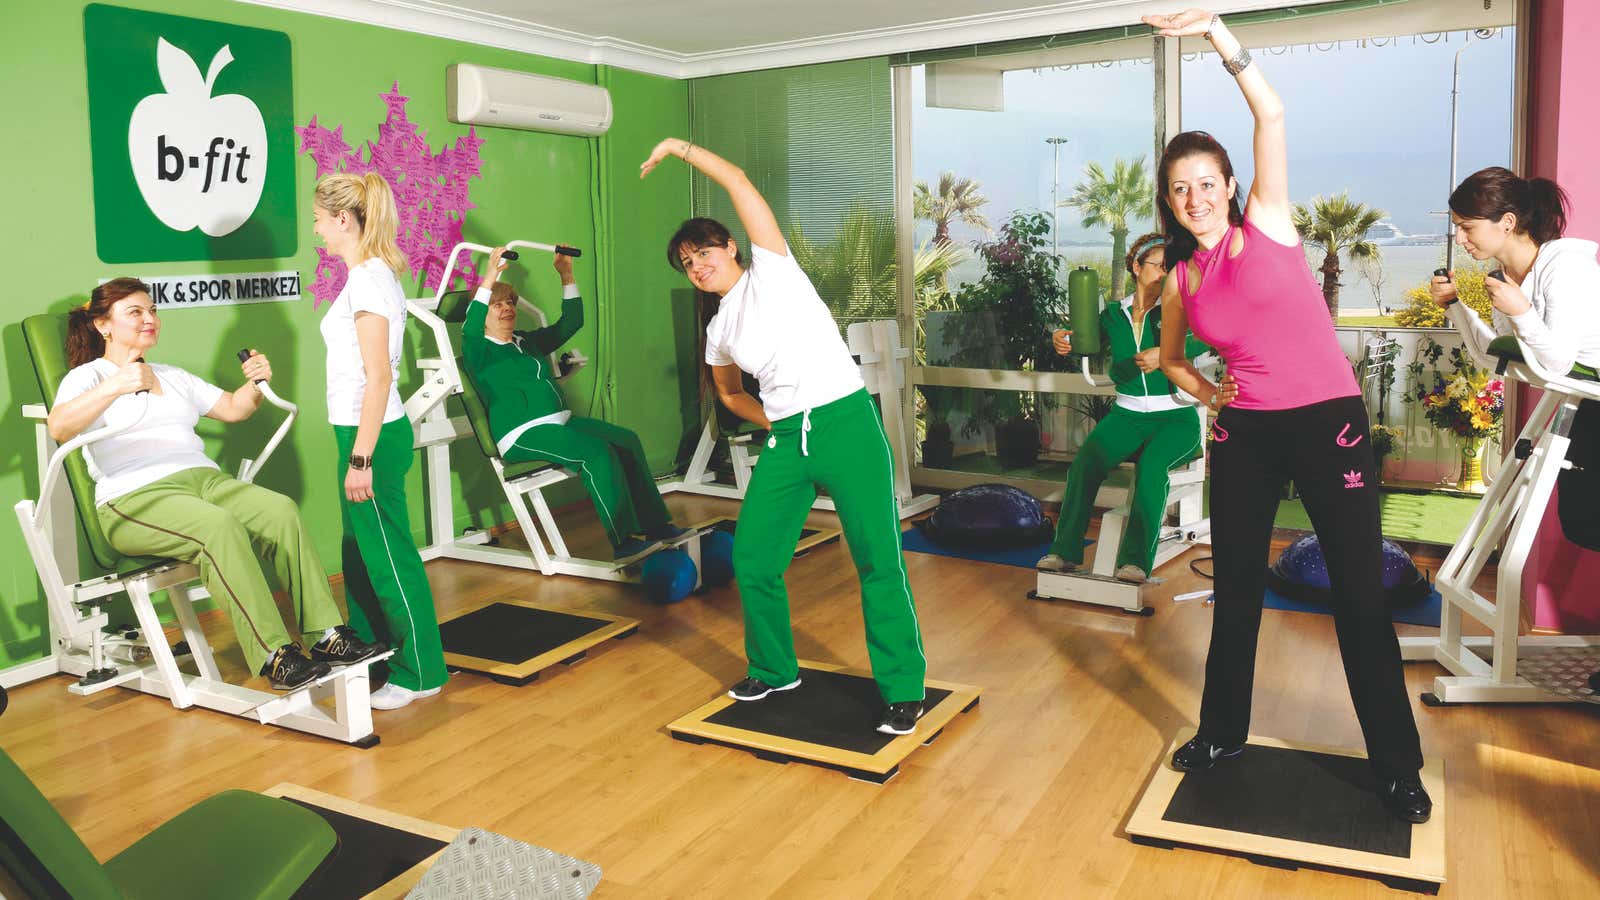 B-fit is one of Turkey’s biggest startups with 130,000 members at 205 gyms.